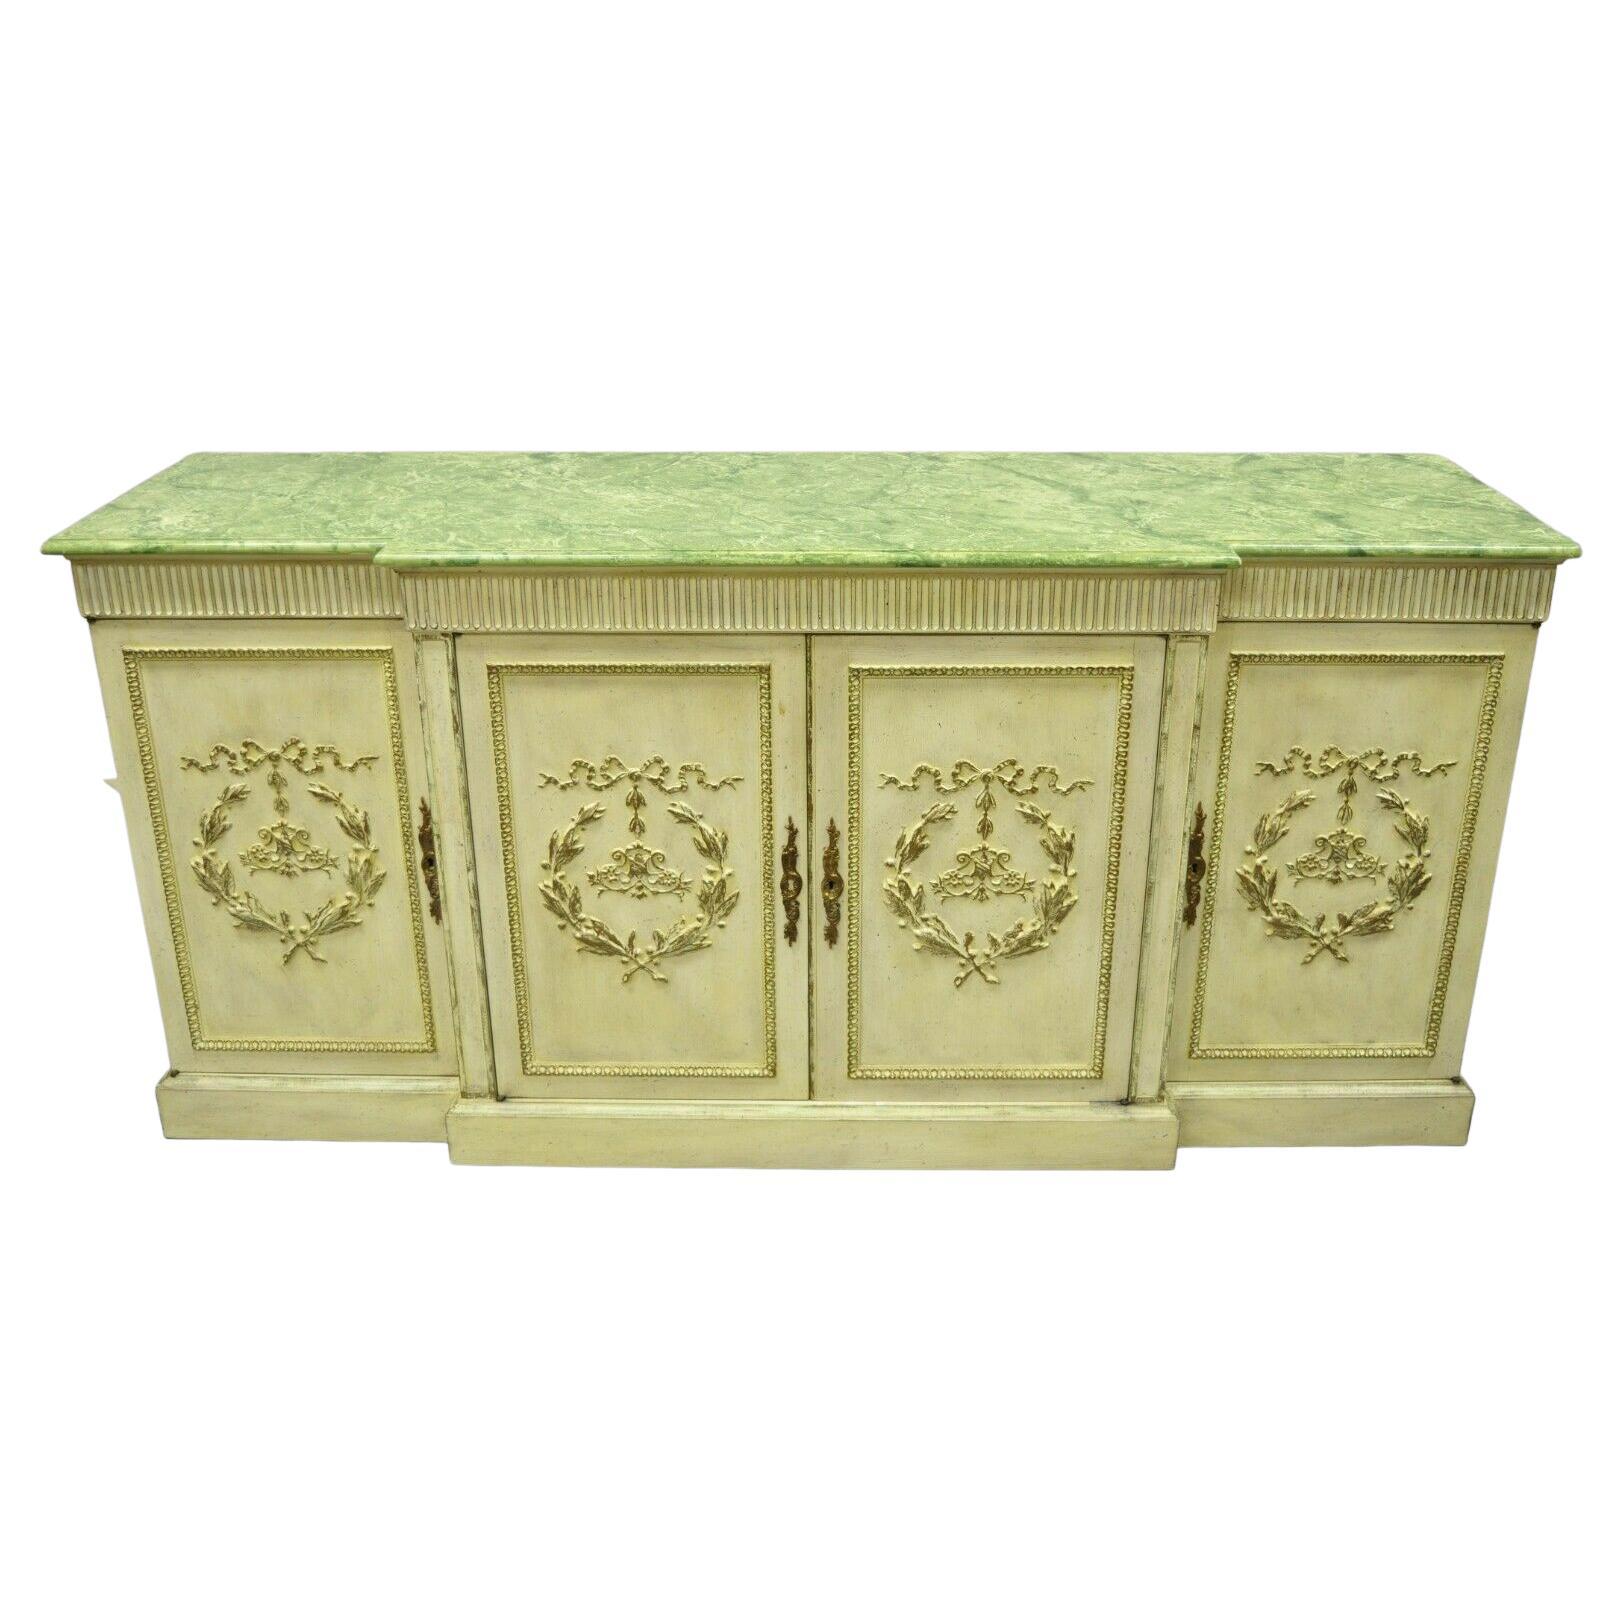 Vintage Italian Neoclassical Buffet Sideboard Credenza Green Faux Marble Top For Sale